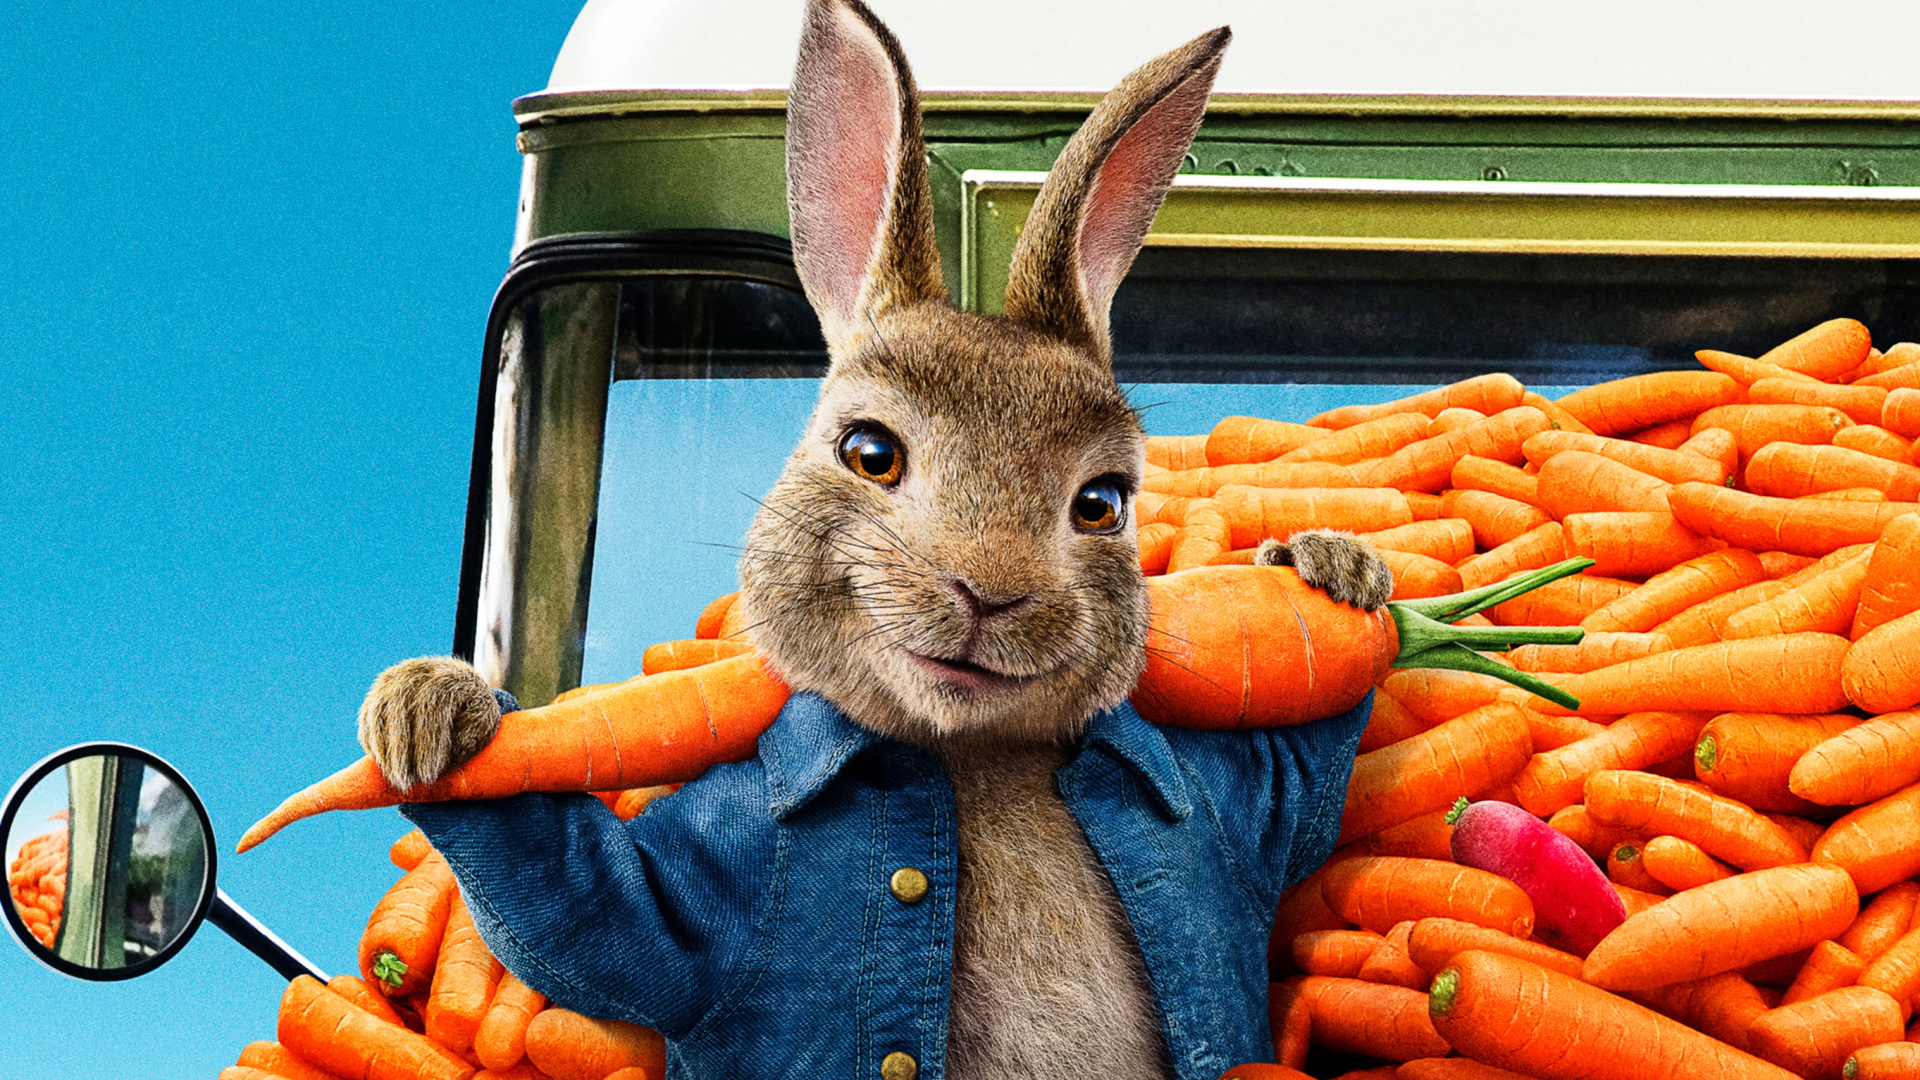 Poster of the new film Peter Rabbit 2, 2020